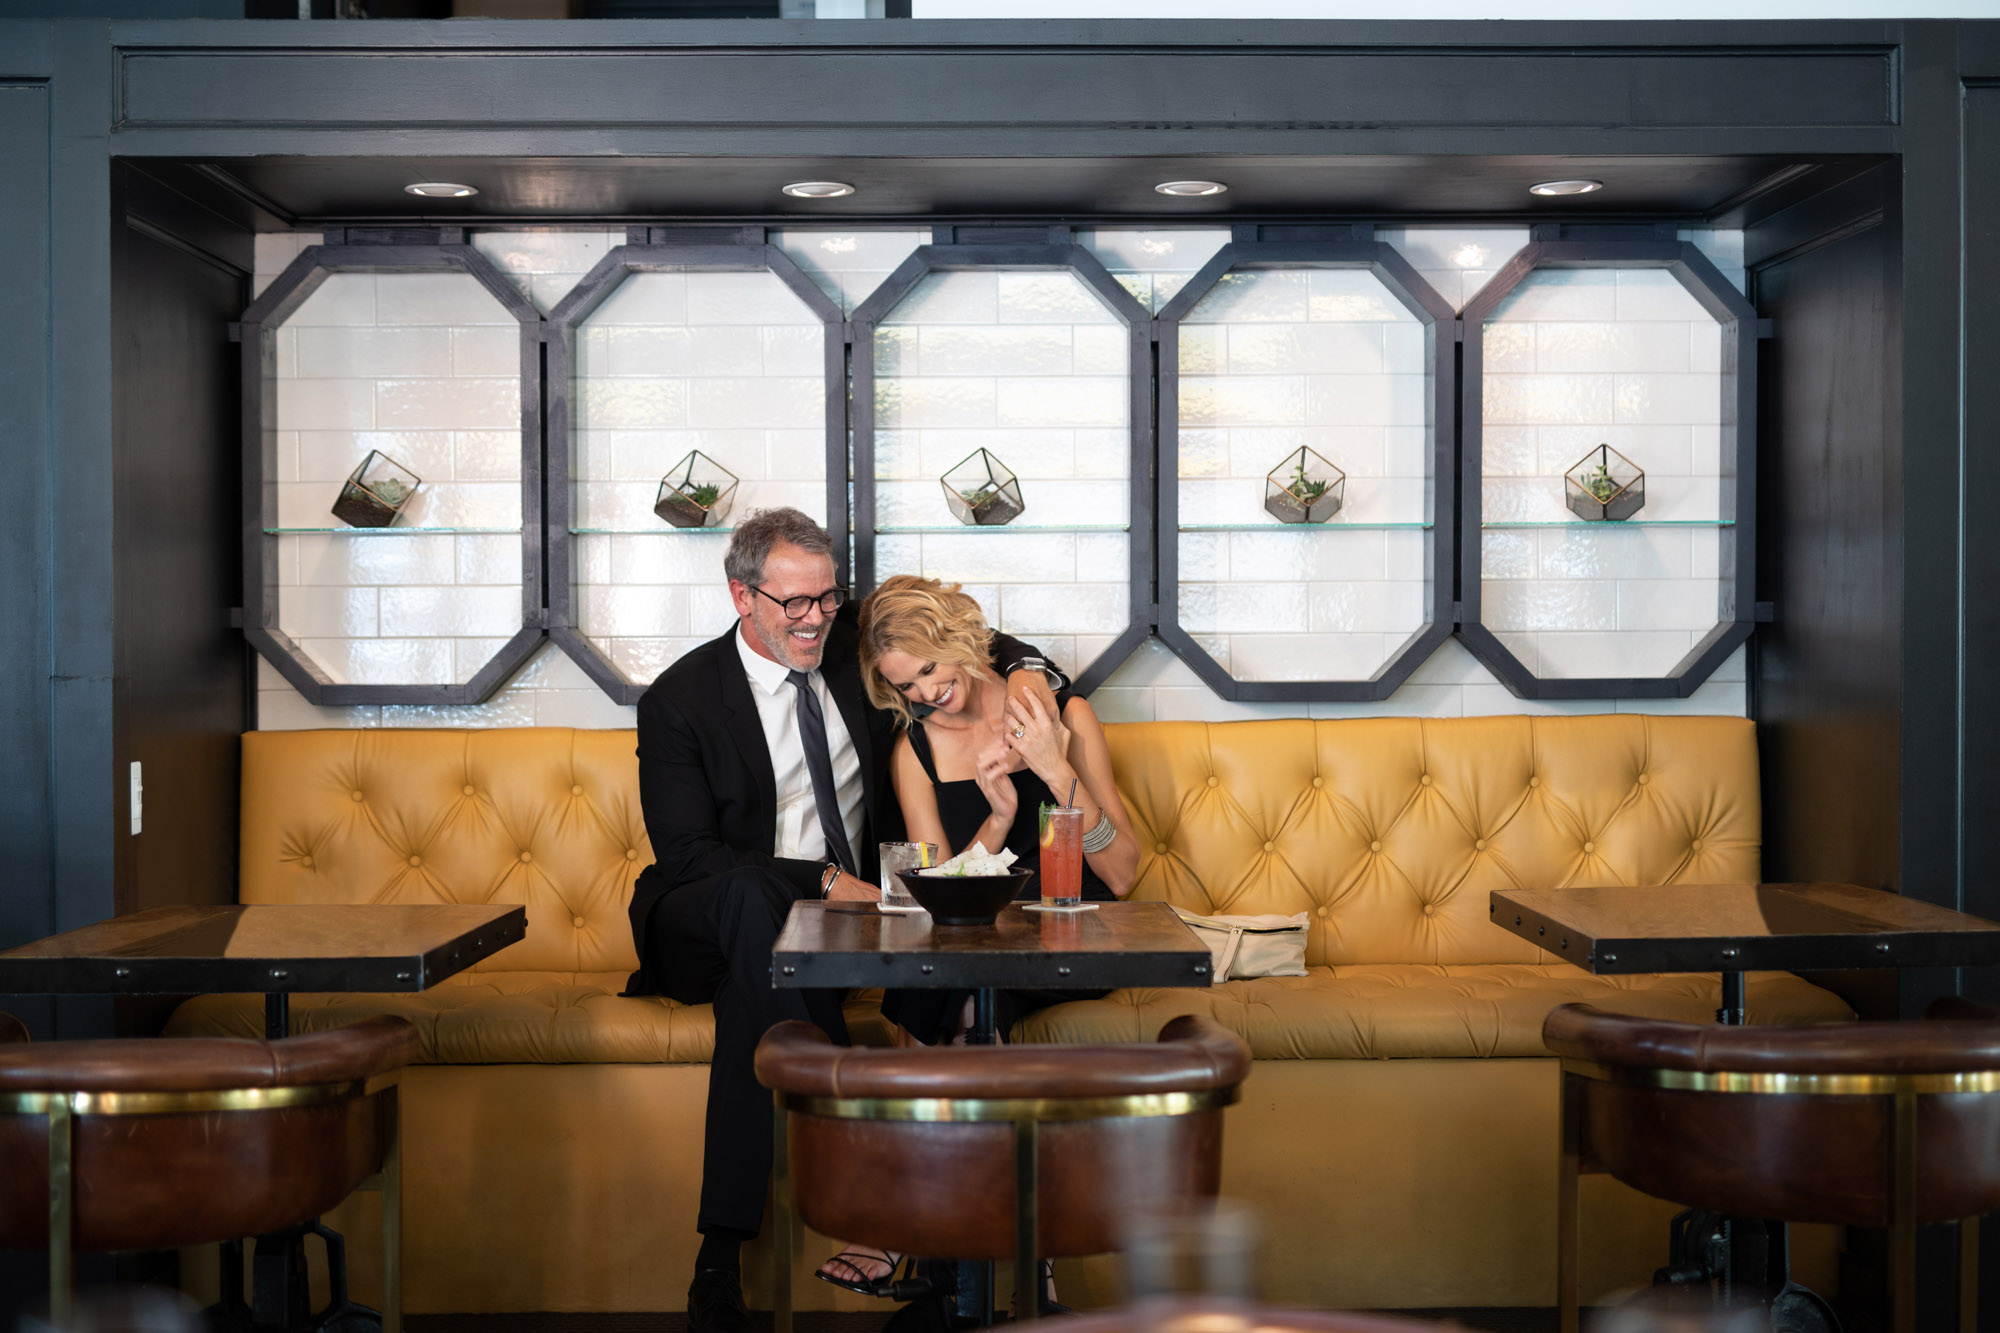 Florida Photography | couple in restaurant lifestyle | Steven Martine